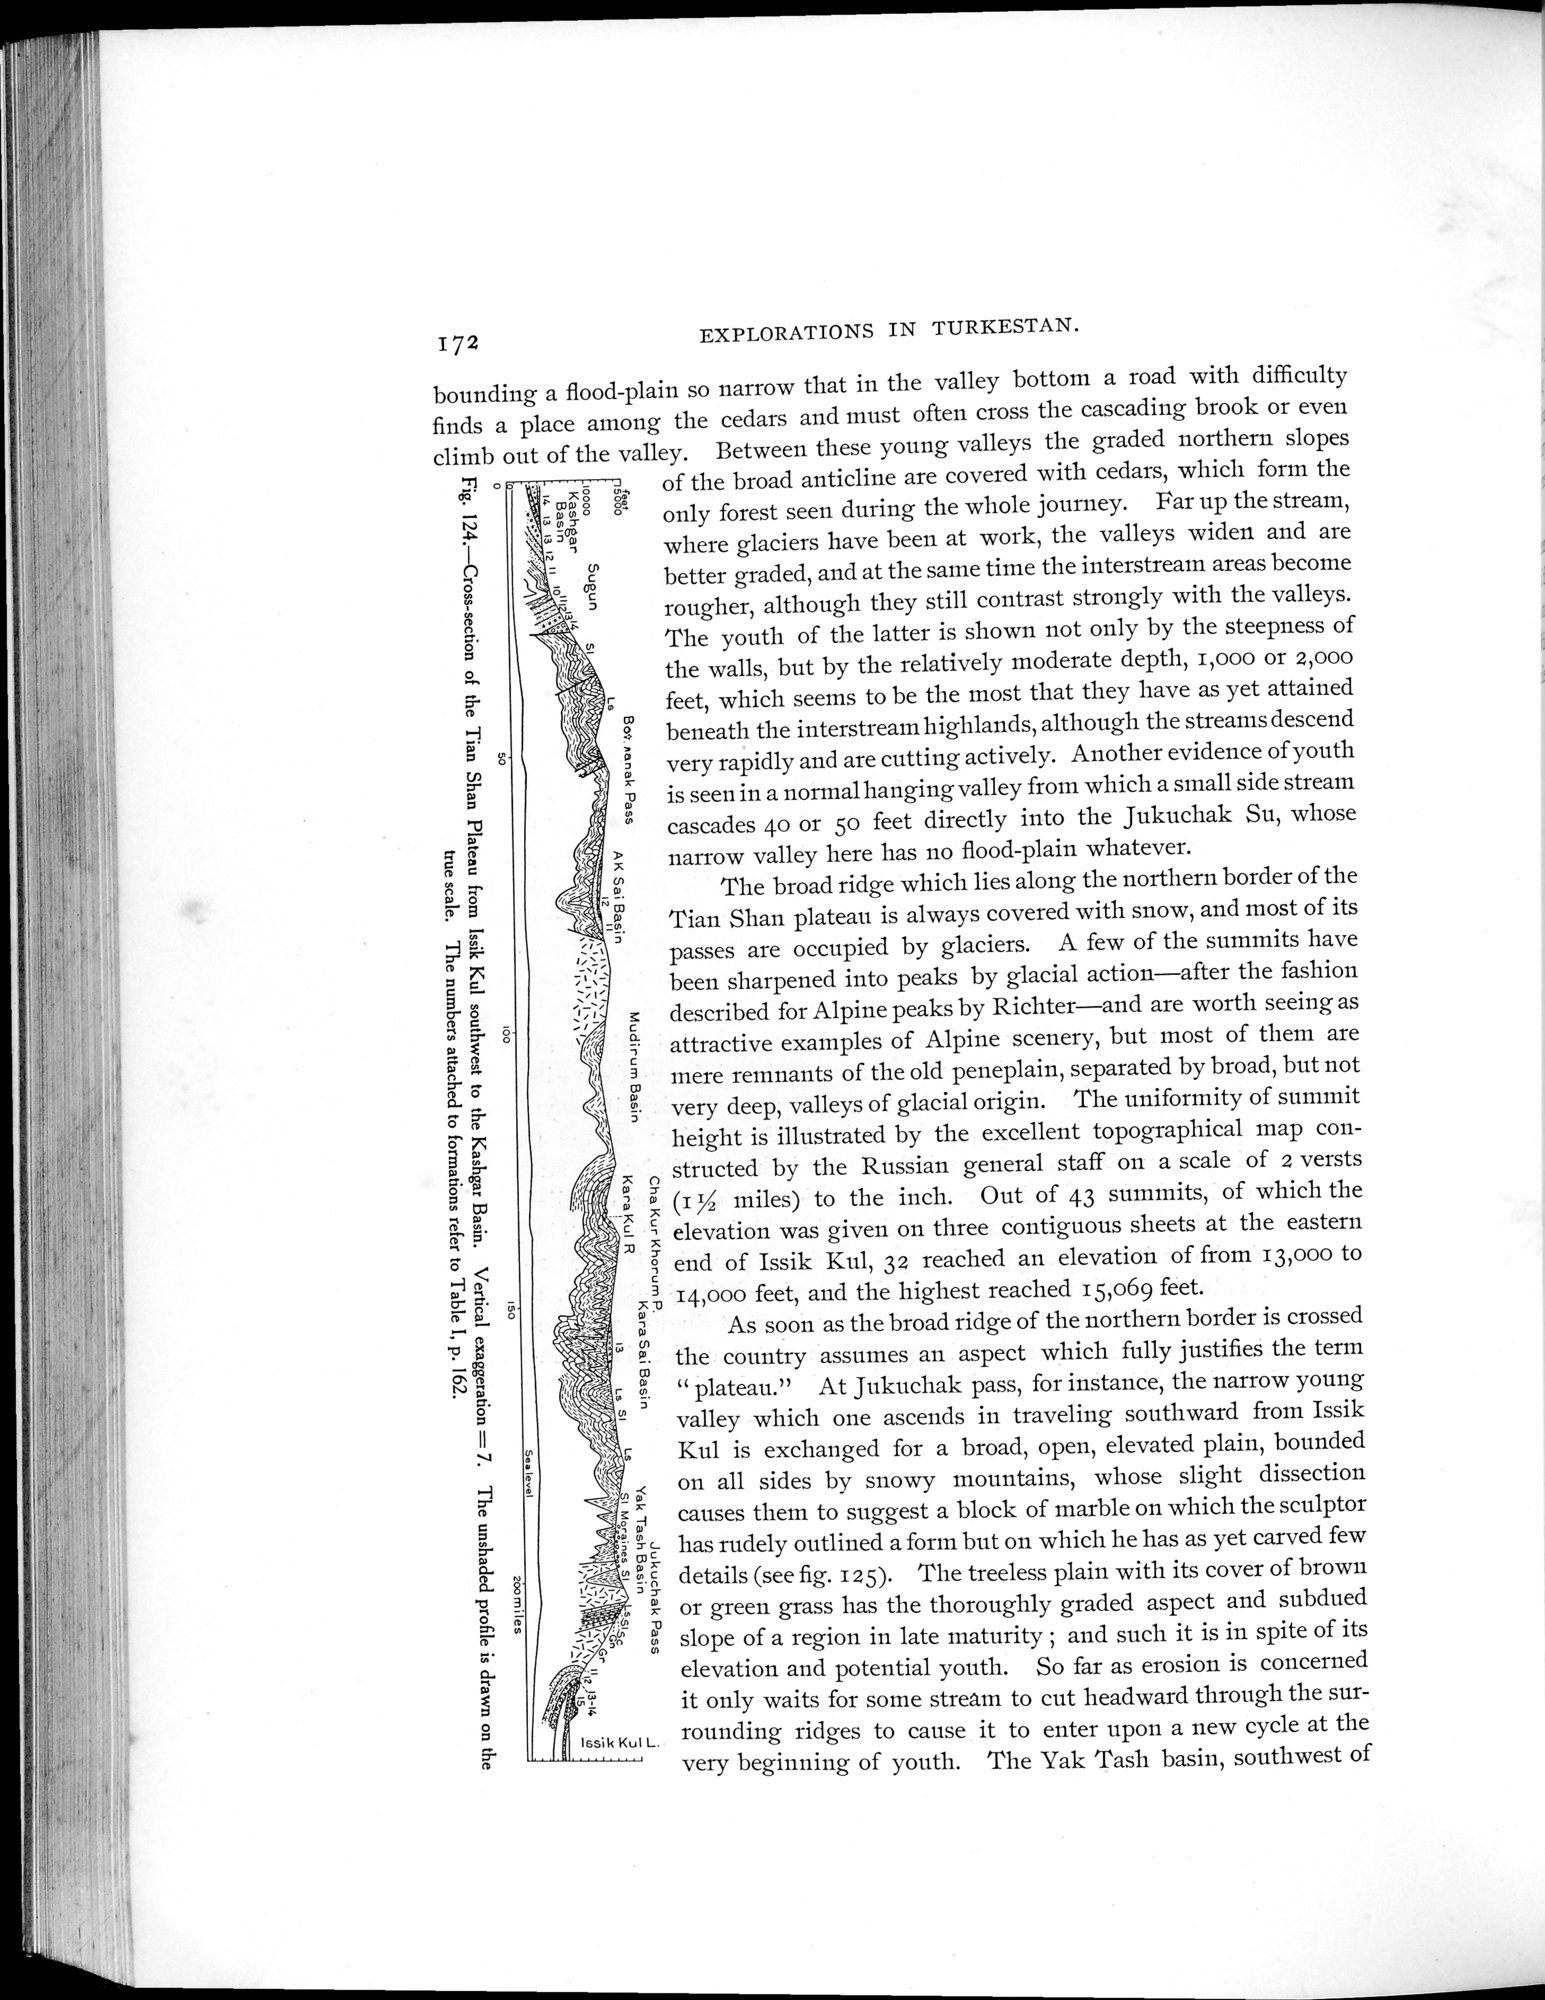 Explorations in Turkestan 1903 : vol.1 / Page 202 (Grayscale High Resolution Image)